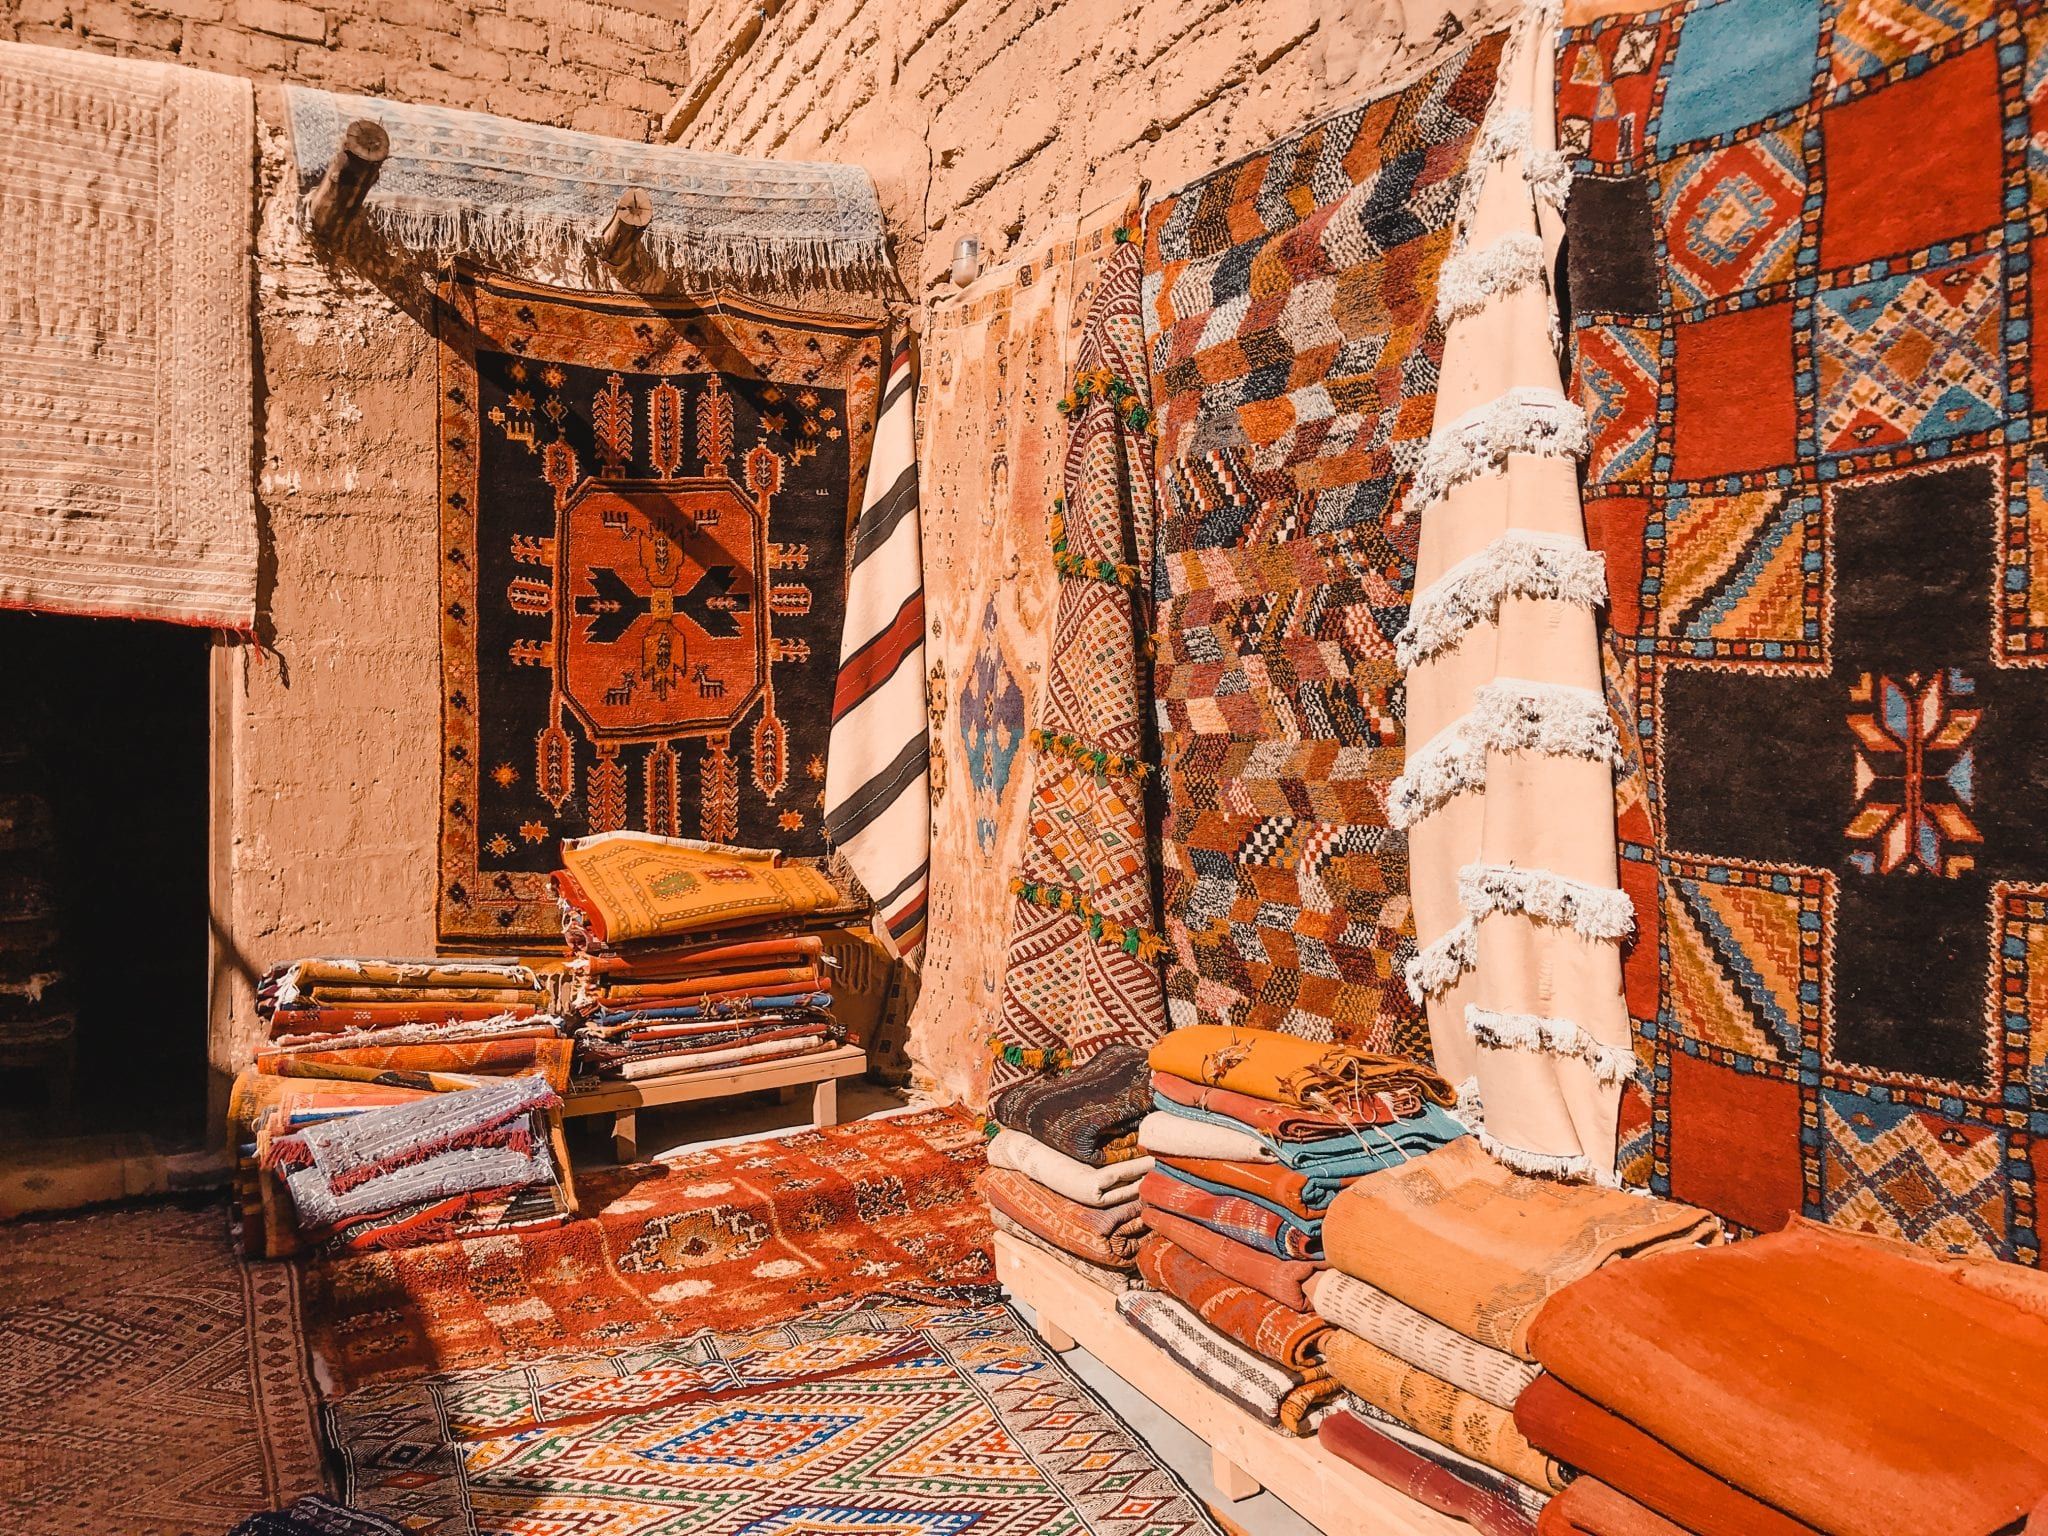 Buying A Rug In Morocco: The Best Tips And Tricks | Poppy Bling Within Moroccan Rugs (View 14 of 15)